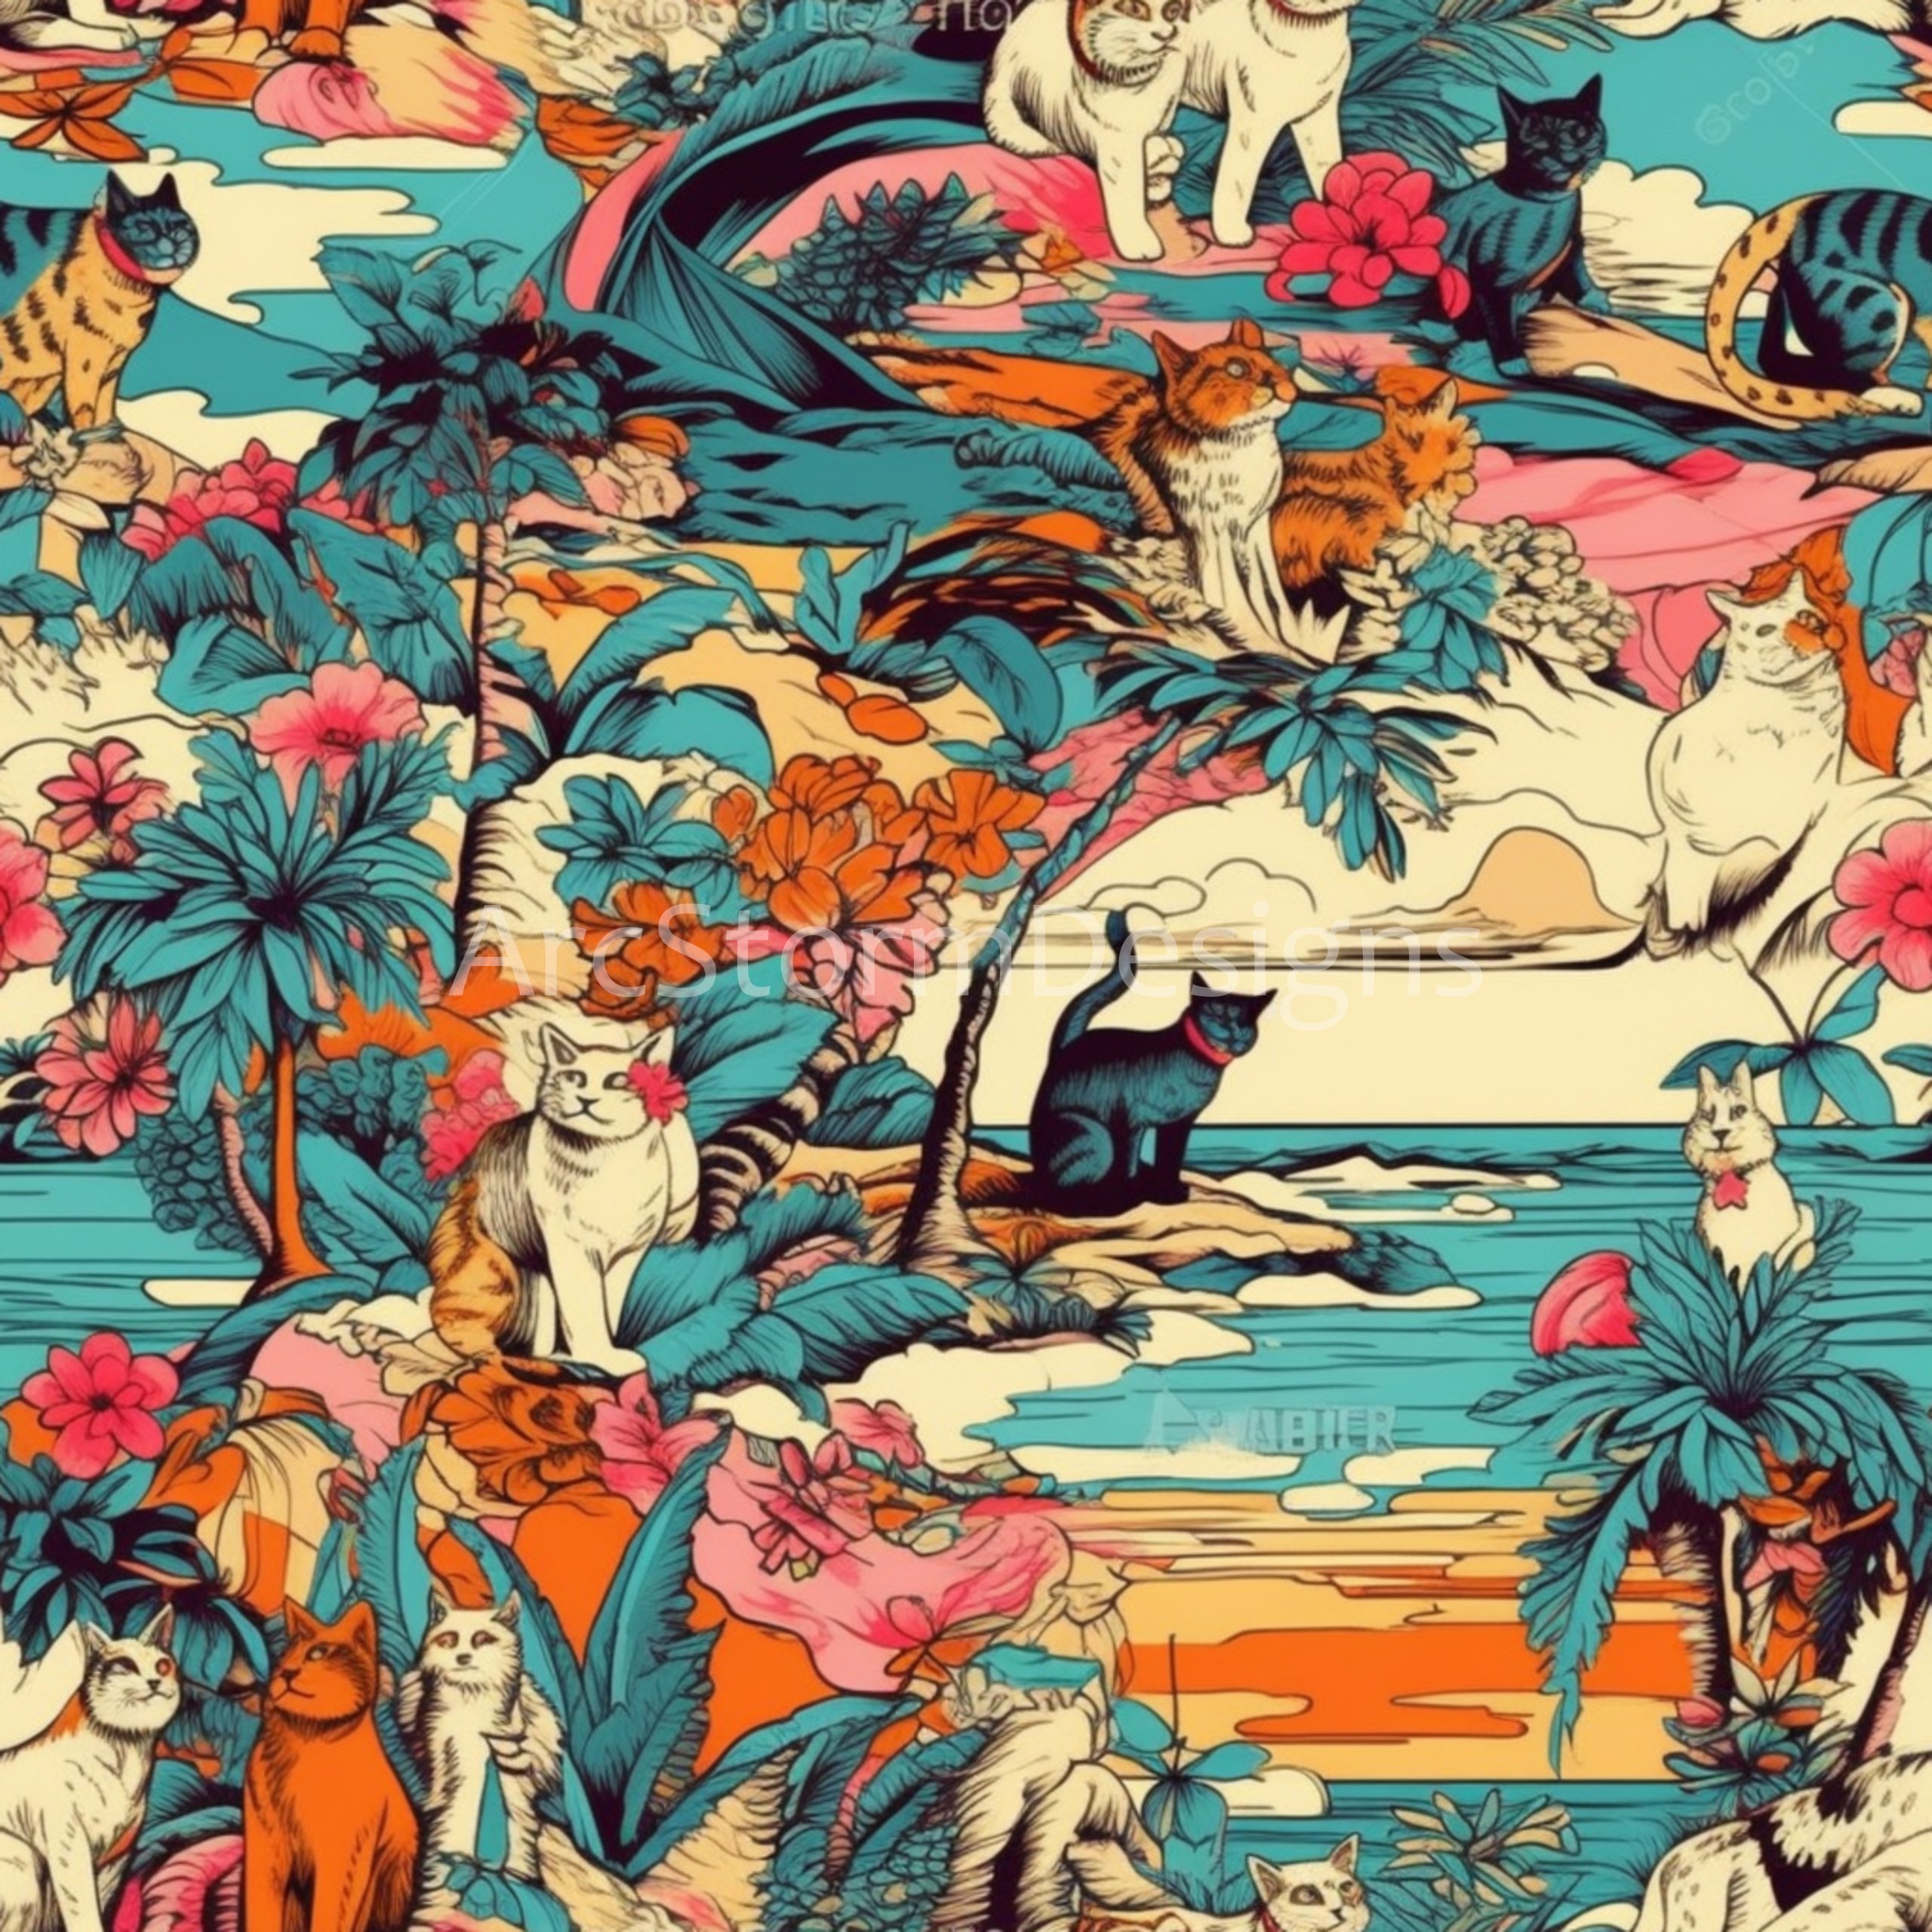 Cats on a Tropical Island Tiled Artwork